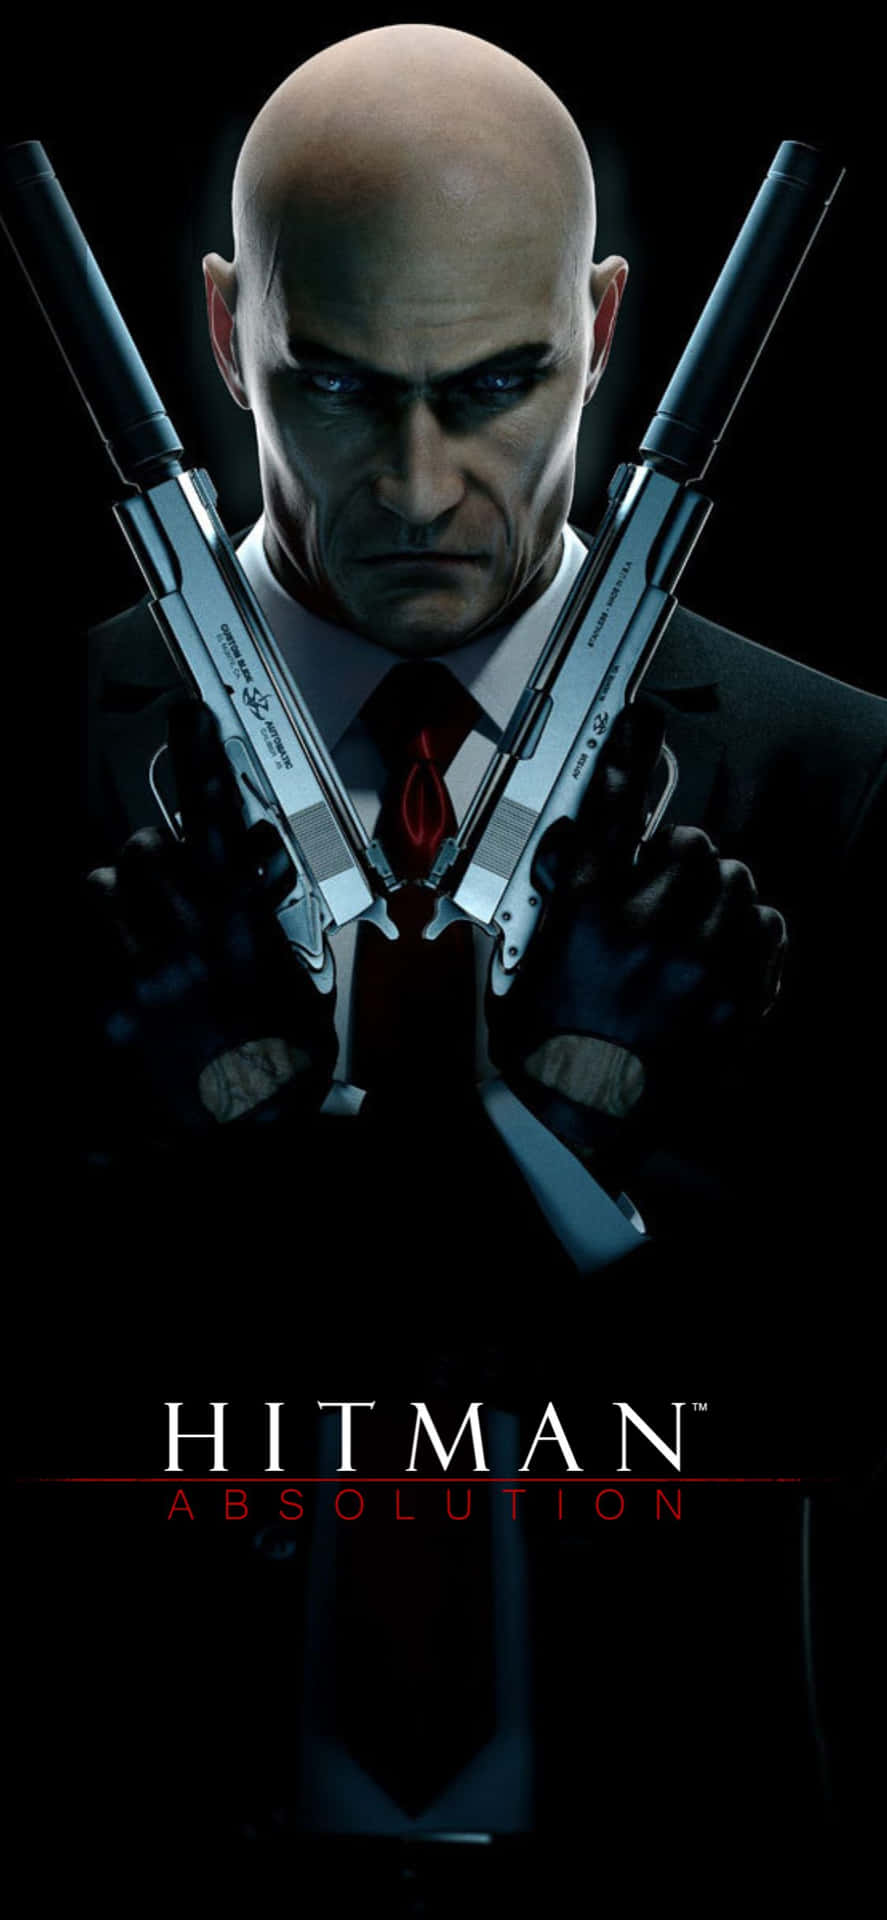 Experience an immersive world of assassins and deception with Hitman Absolution on iPhone X